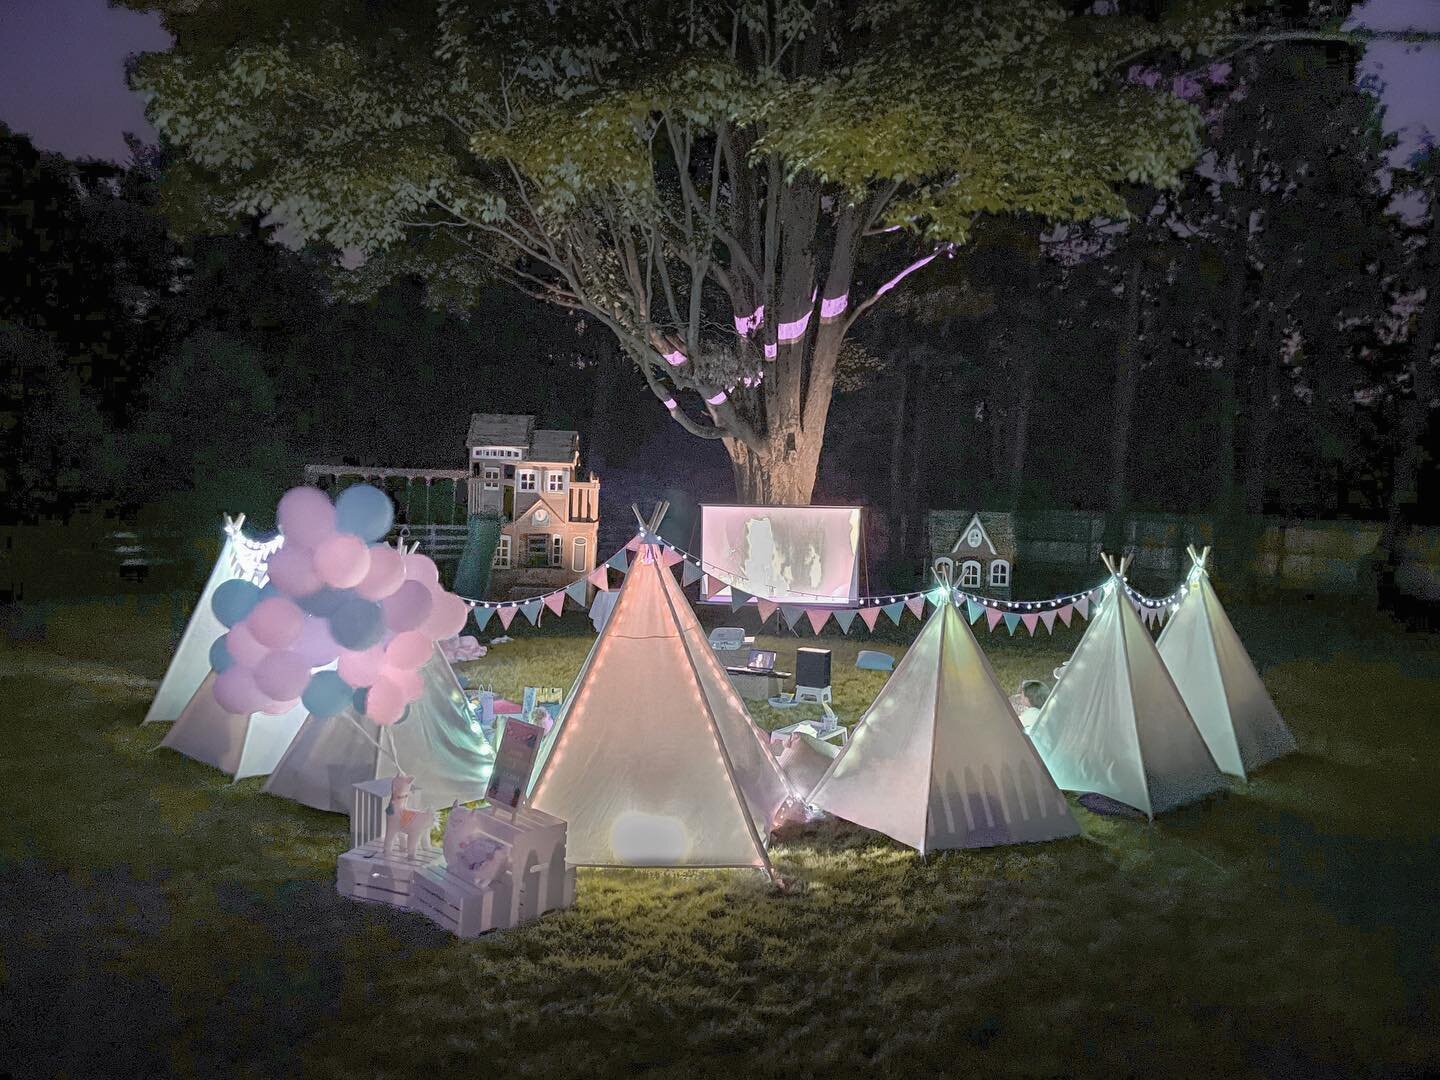 What a magical movie night! We set up the coziest lounge area under a beautiful tree to celebrate a very special sweet birthday girl. The night turned out beyond dreamy! 
Can you guess the theme? More details to come. 
Let the fun come to you.
Event 